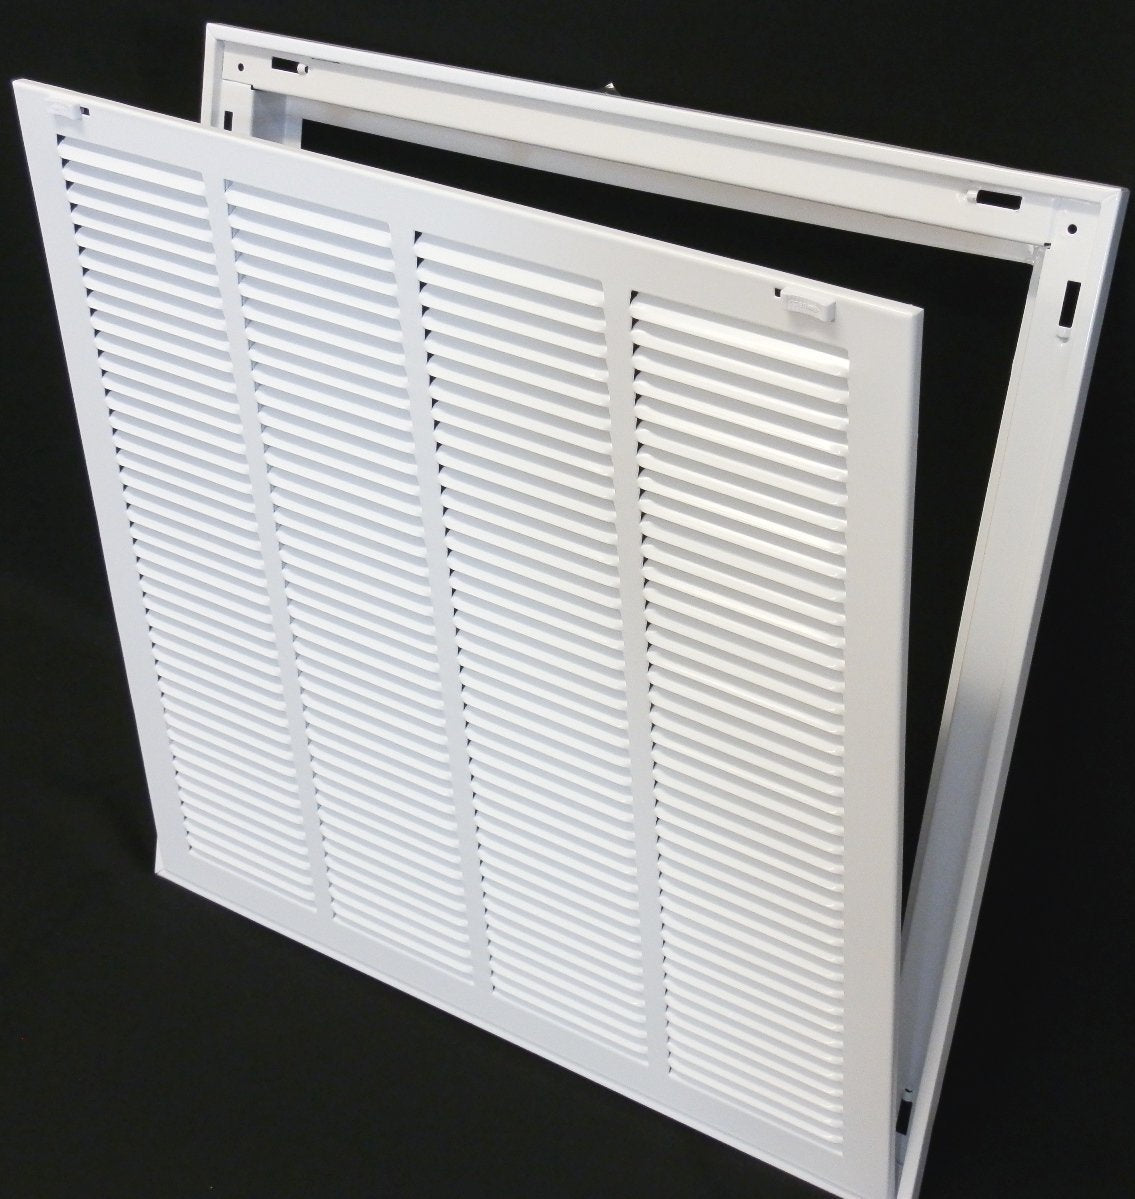 12&quot; X 16&quot; Steel Return Air Filter Grille for 1&quot; Filter - Removable Frame - [Outer Dimensions: 14 5/8&quot; X 18 5/8&quot;]